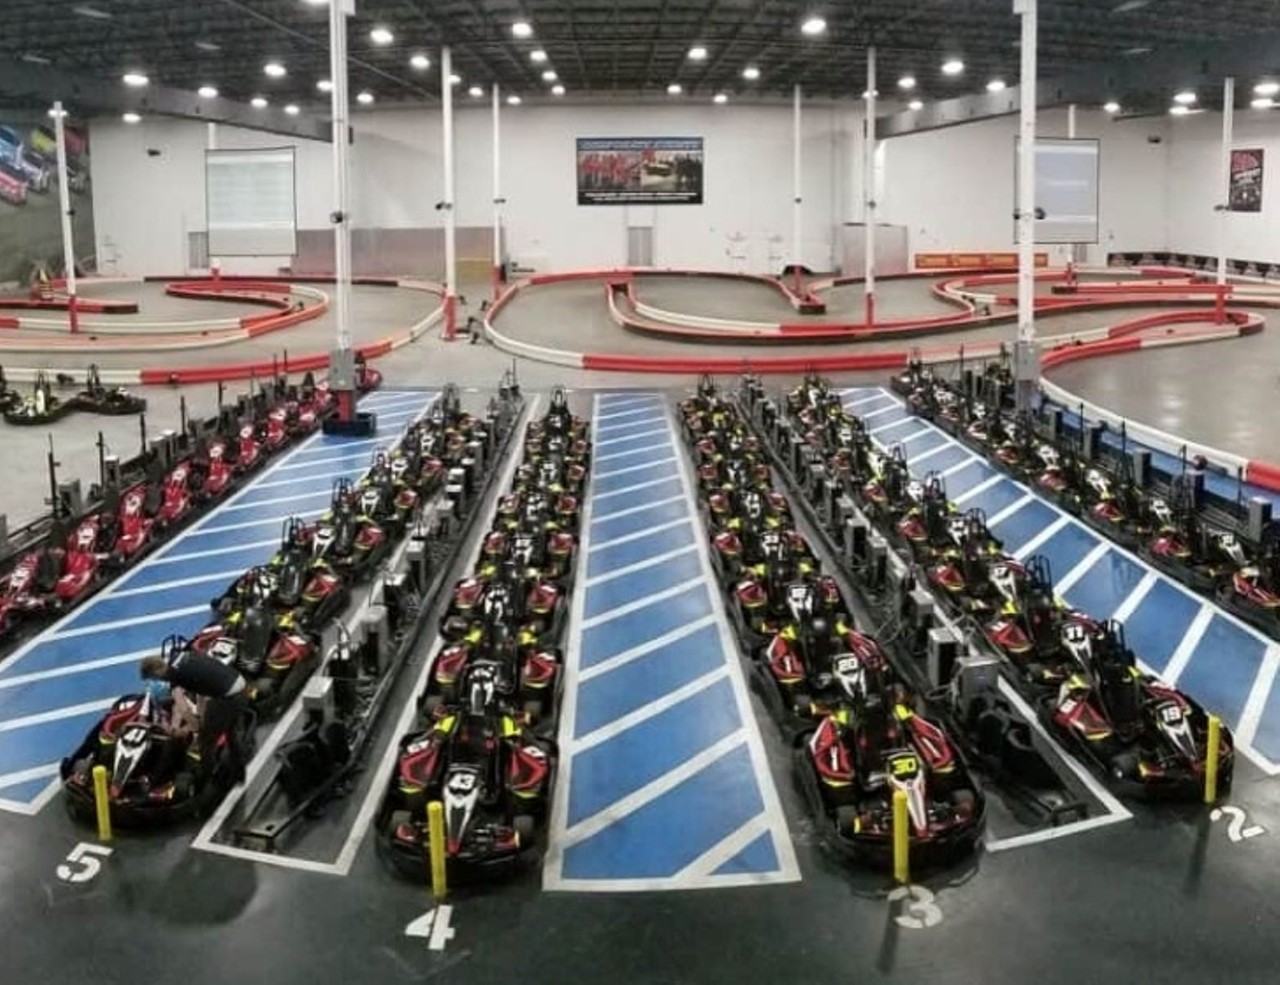 K1 
9550 Parksouth Ct #400, 407-338-4928, Open Now
K1 Speed claims to have the &#147;best indoor karting in American&#148; and is just the place for families to enjoy a little competition and excitement. The facility boasts of its all-electric go-karts designed in Europe to ensure maximum performance up to 45 mph. K1 requires all staff and guests to wear masks or a head sock and social distance. The venue has also expanded their sanitization protocols and has stocked up on medical-grade air and surface purifiers that reduces up to 99.9 percent of bacteria and viruses.
Photo via K1 Speed/Website